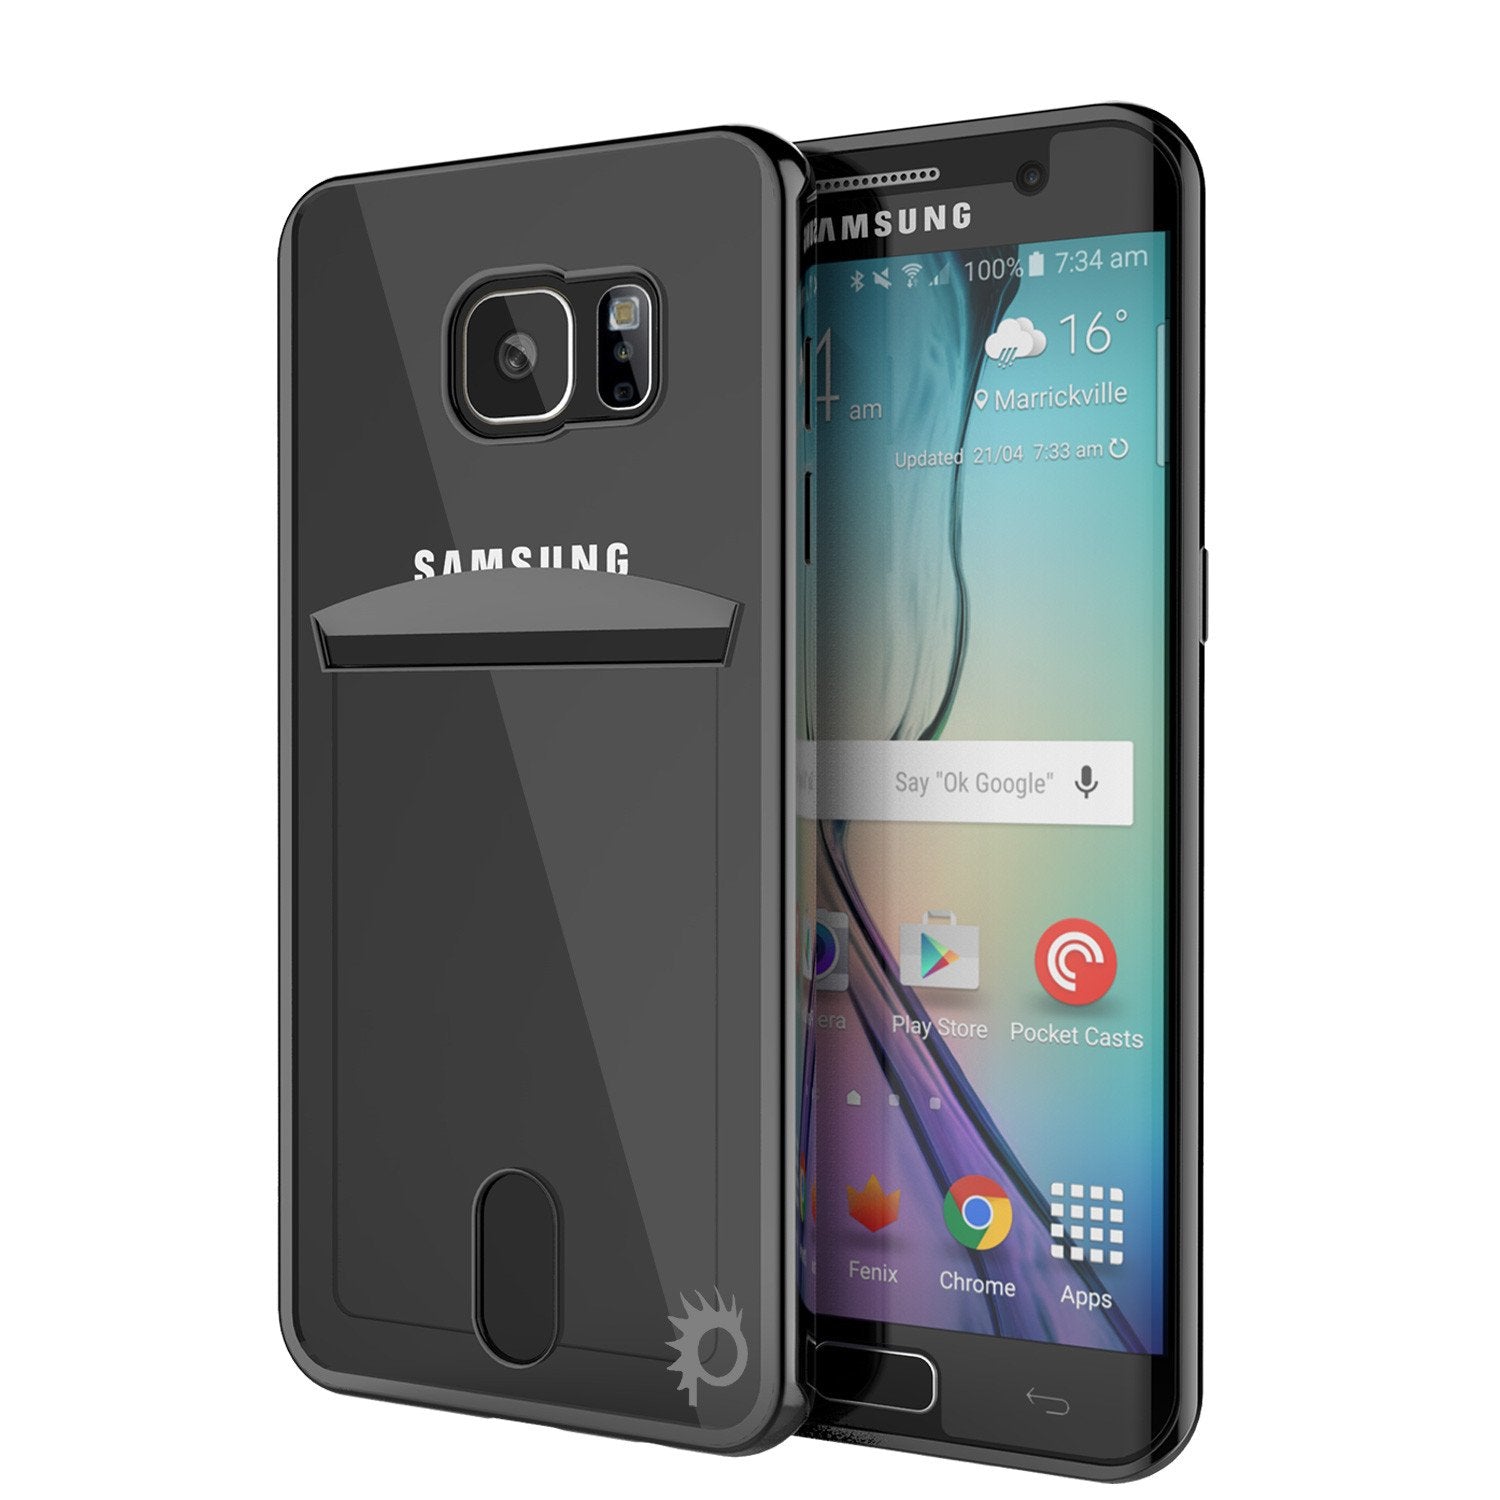 Galaxy S6 EDGE Case, PUNKCASE® LUCID Black Series | Card Slot | SHIELD Screen Protector | Ultra fit